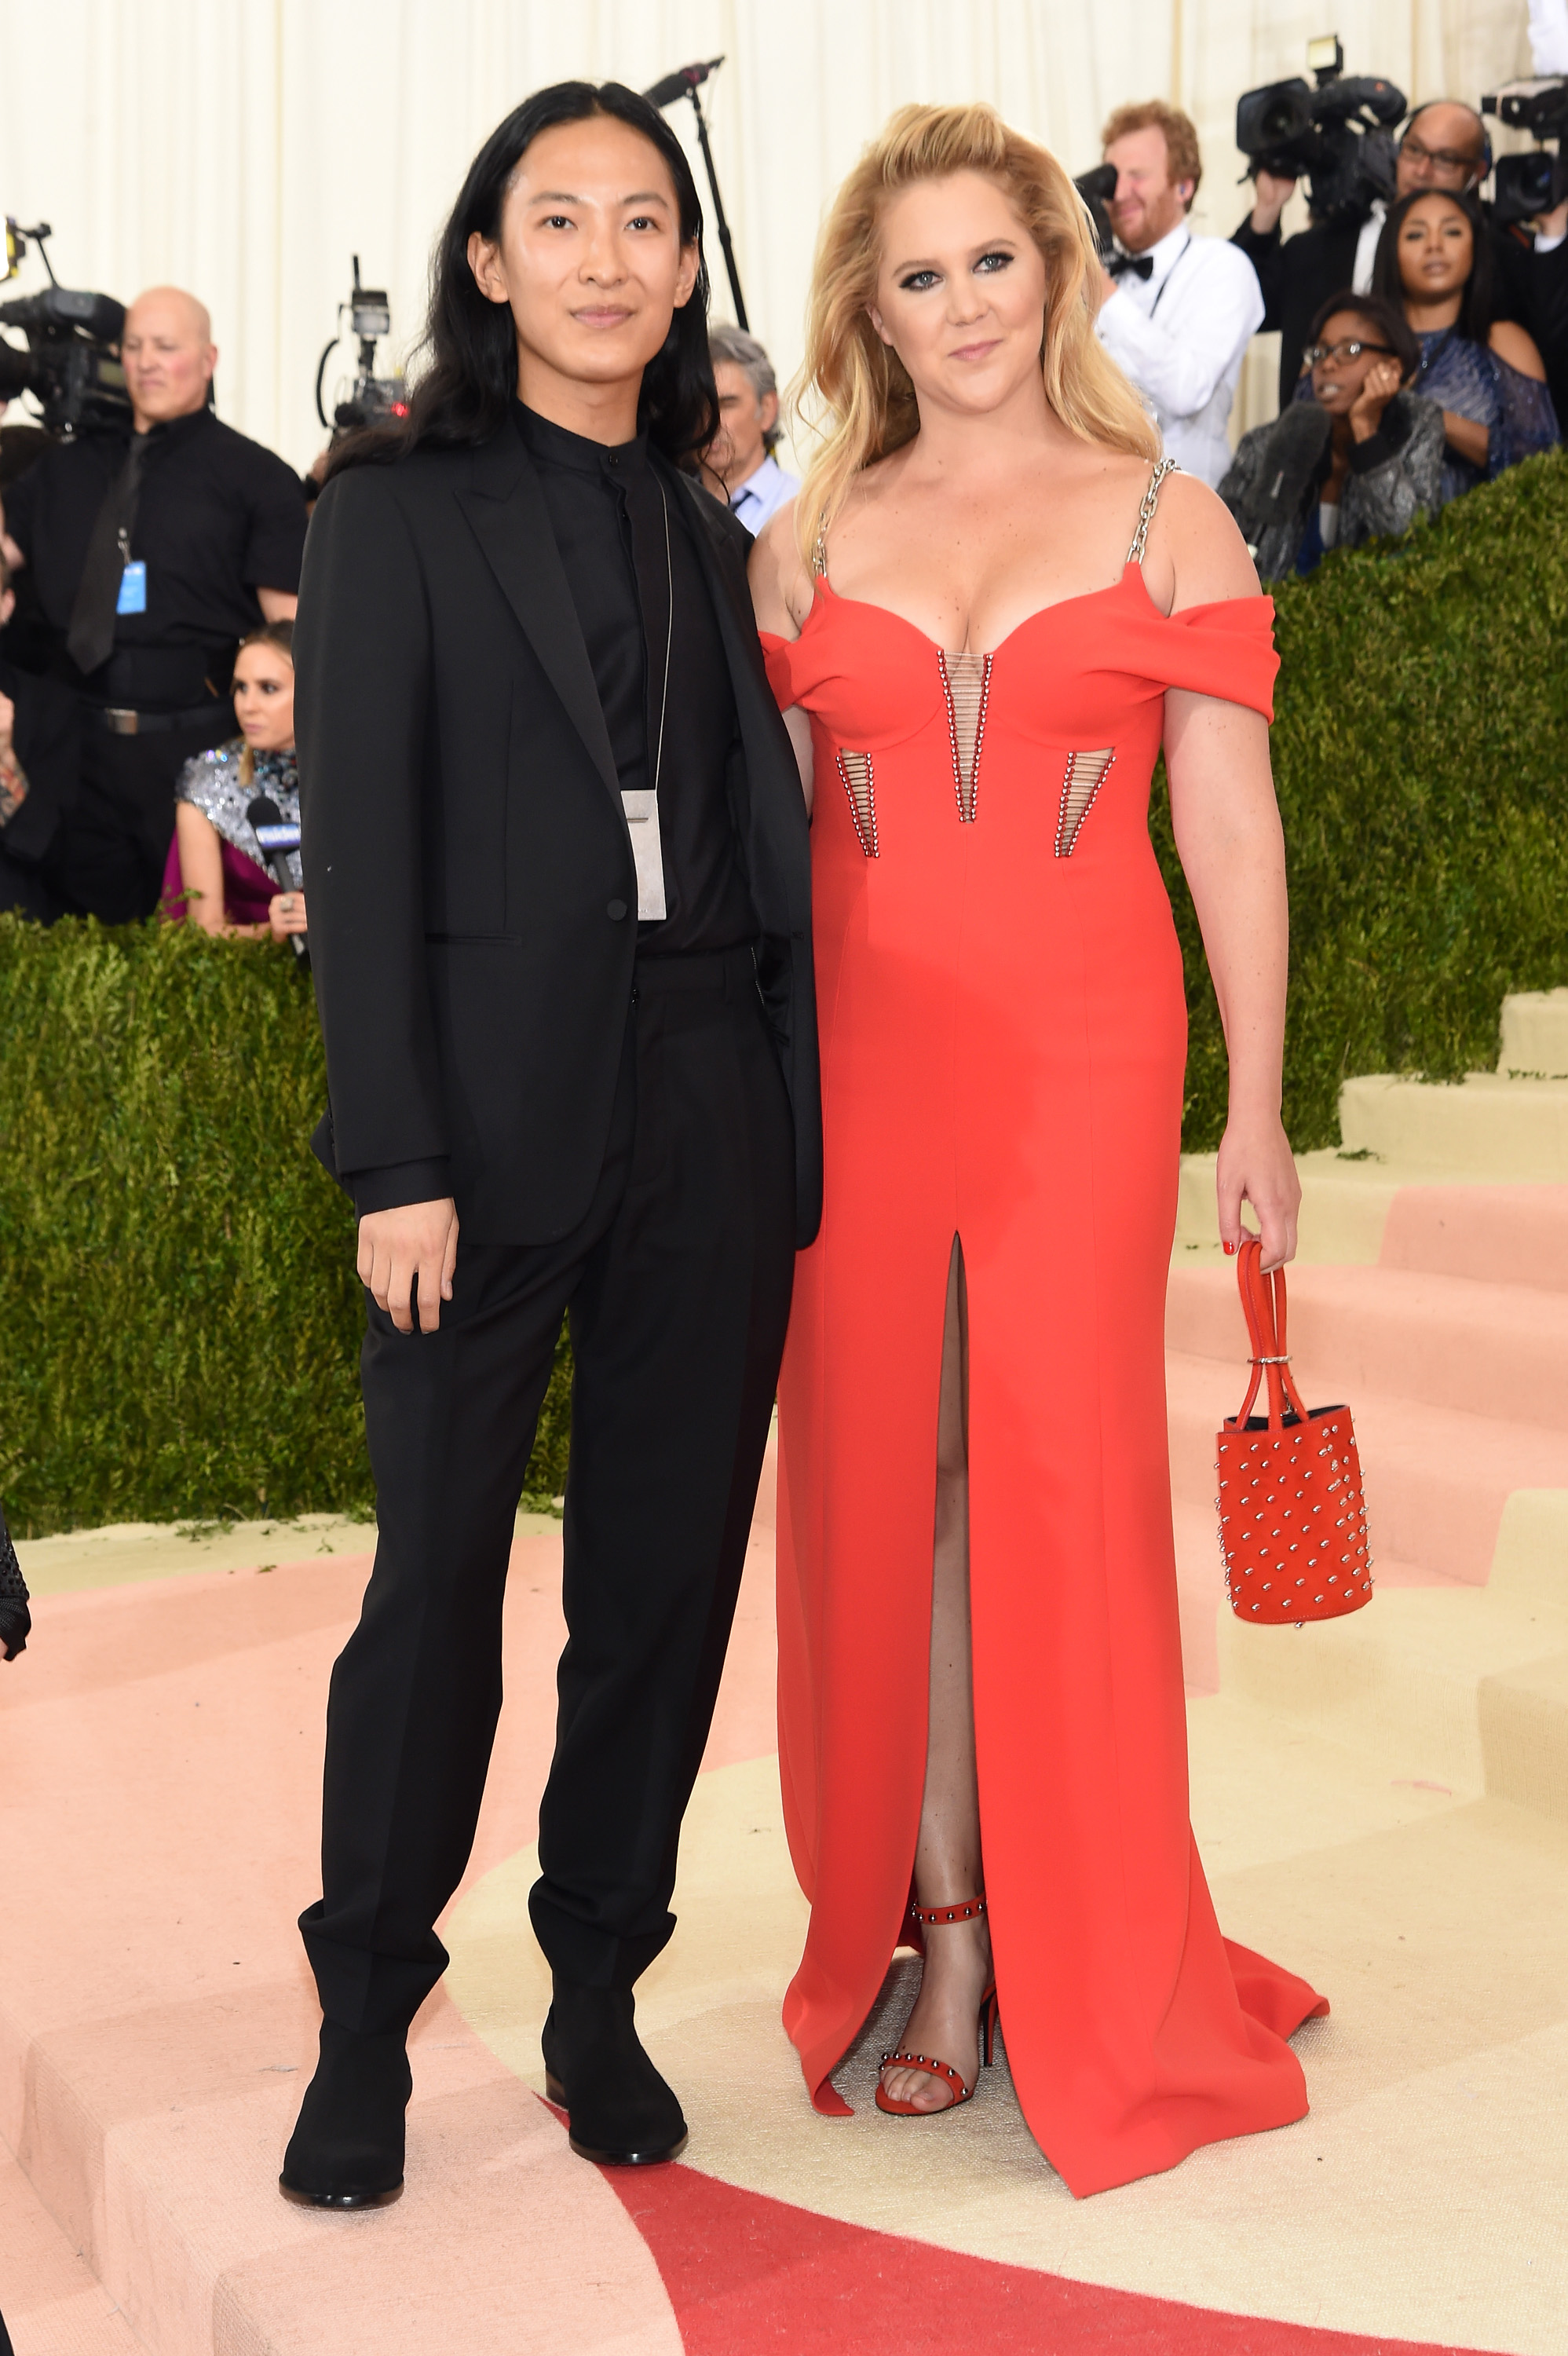 Alexander Wang and Amy Schumer attend "Manus x Machina: Fashion In An Age Of Technology" Costume Institute Gala at Metropolitan Museum of Art on May 2, 2016 in New York City.